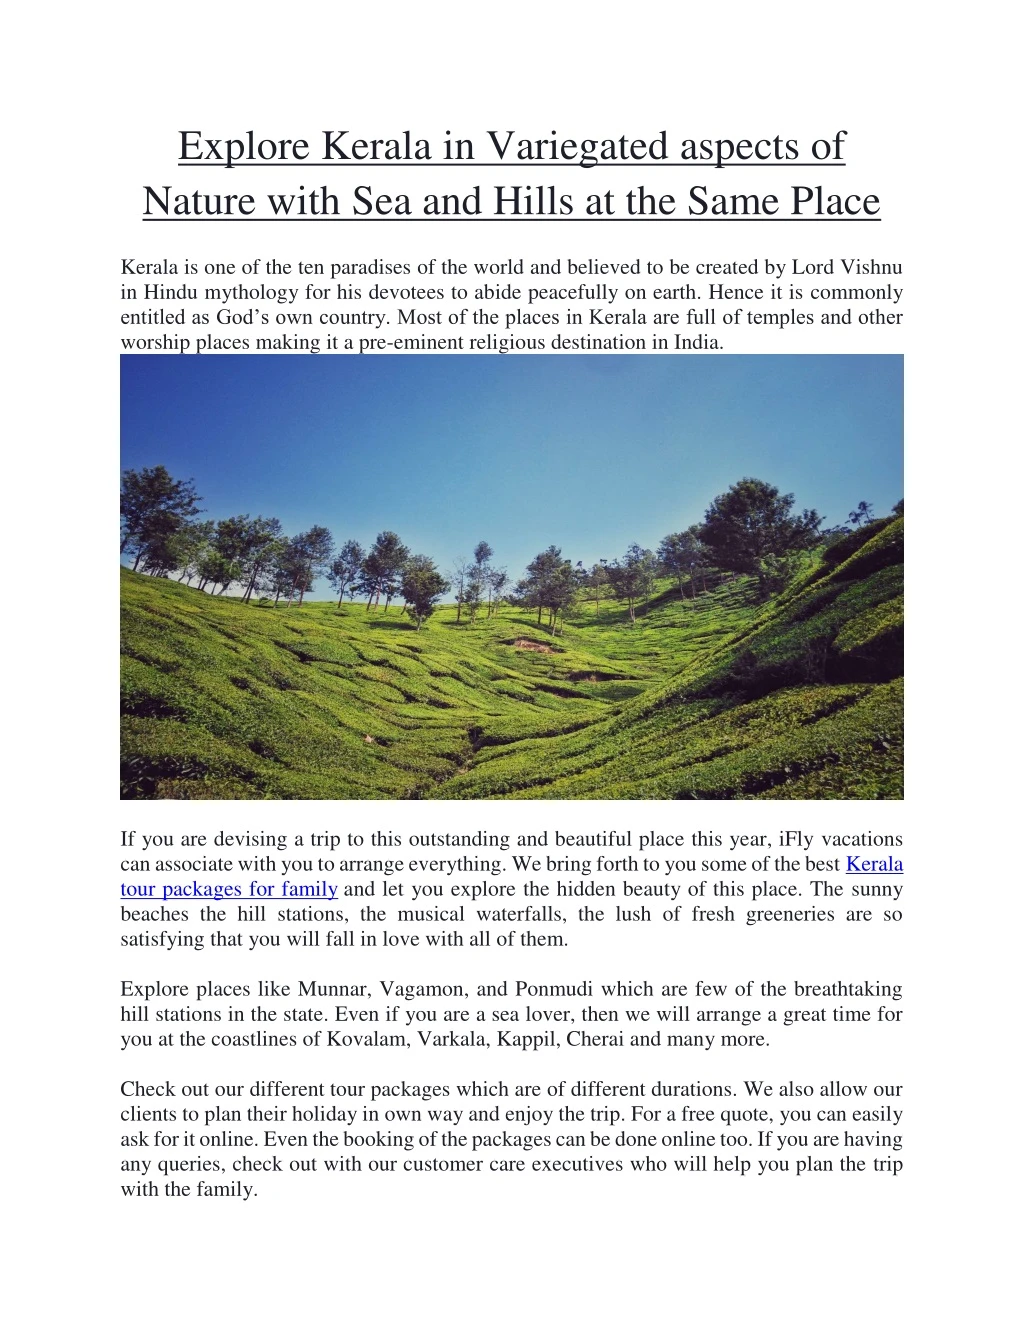 explore kerala in variegated aspects of nature